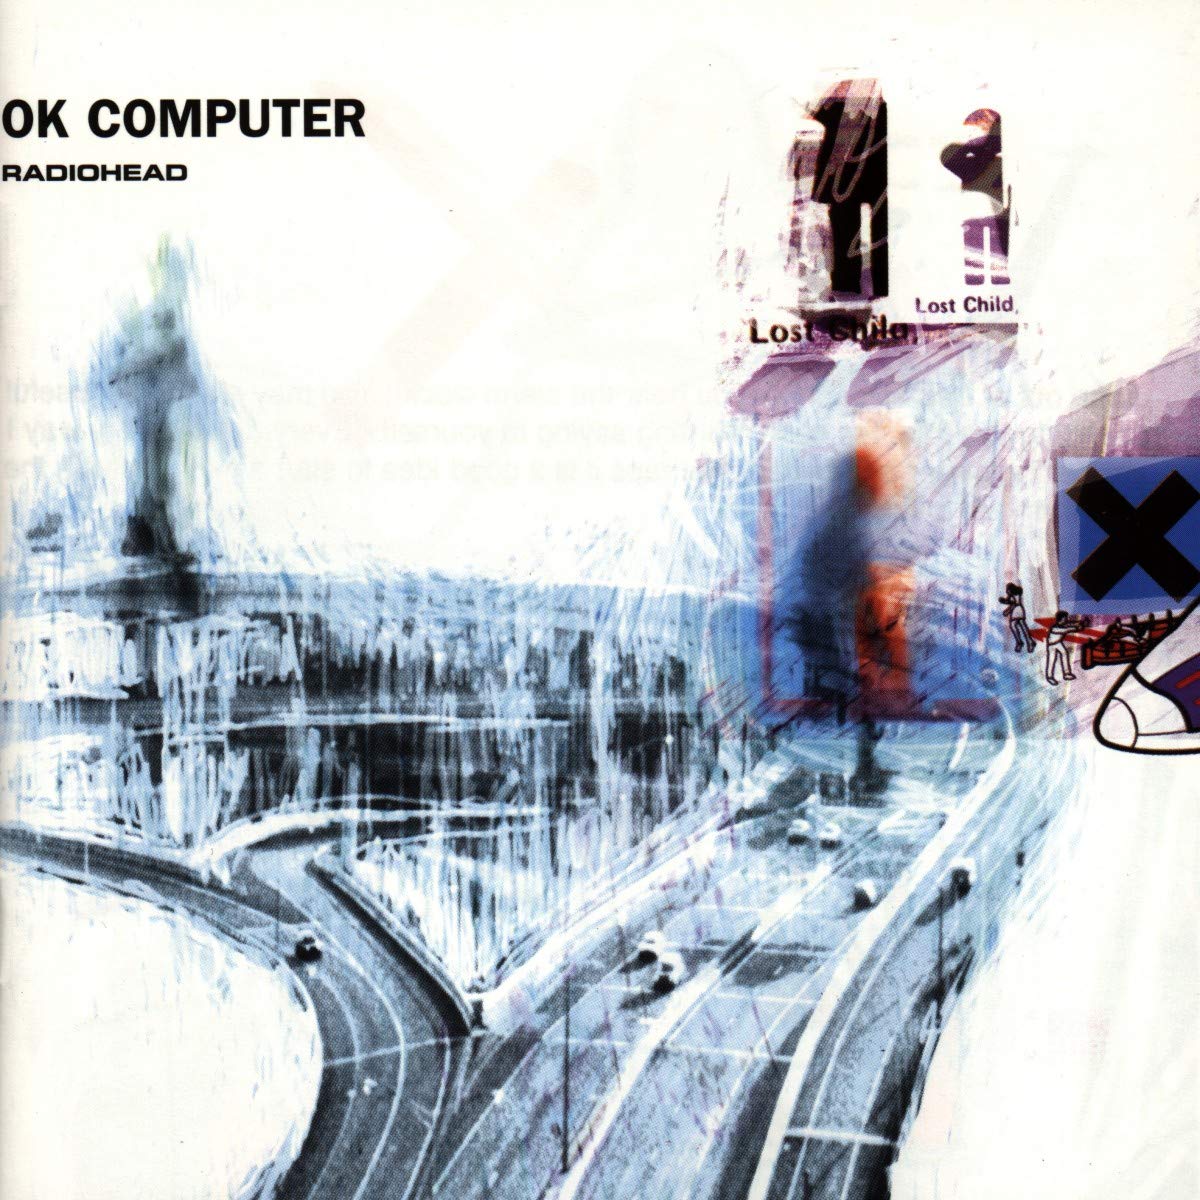 3. Climbing Up The WallsSuch an underrated OK Computer song. It's so fucking tense, I'm on the verge of exploding listening to it. It's the physical embodiment of paranoia. 1/2